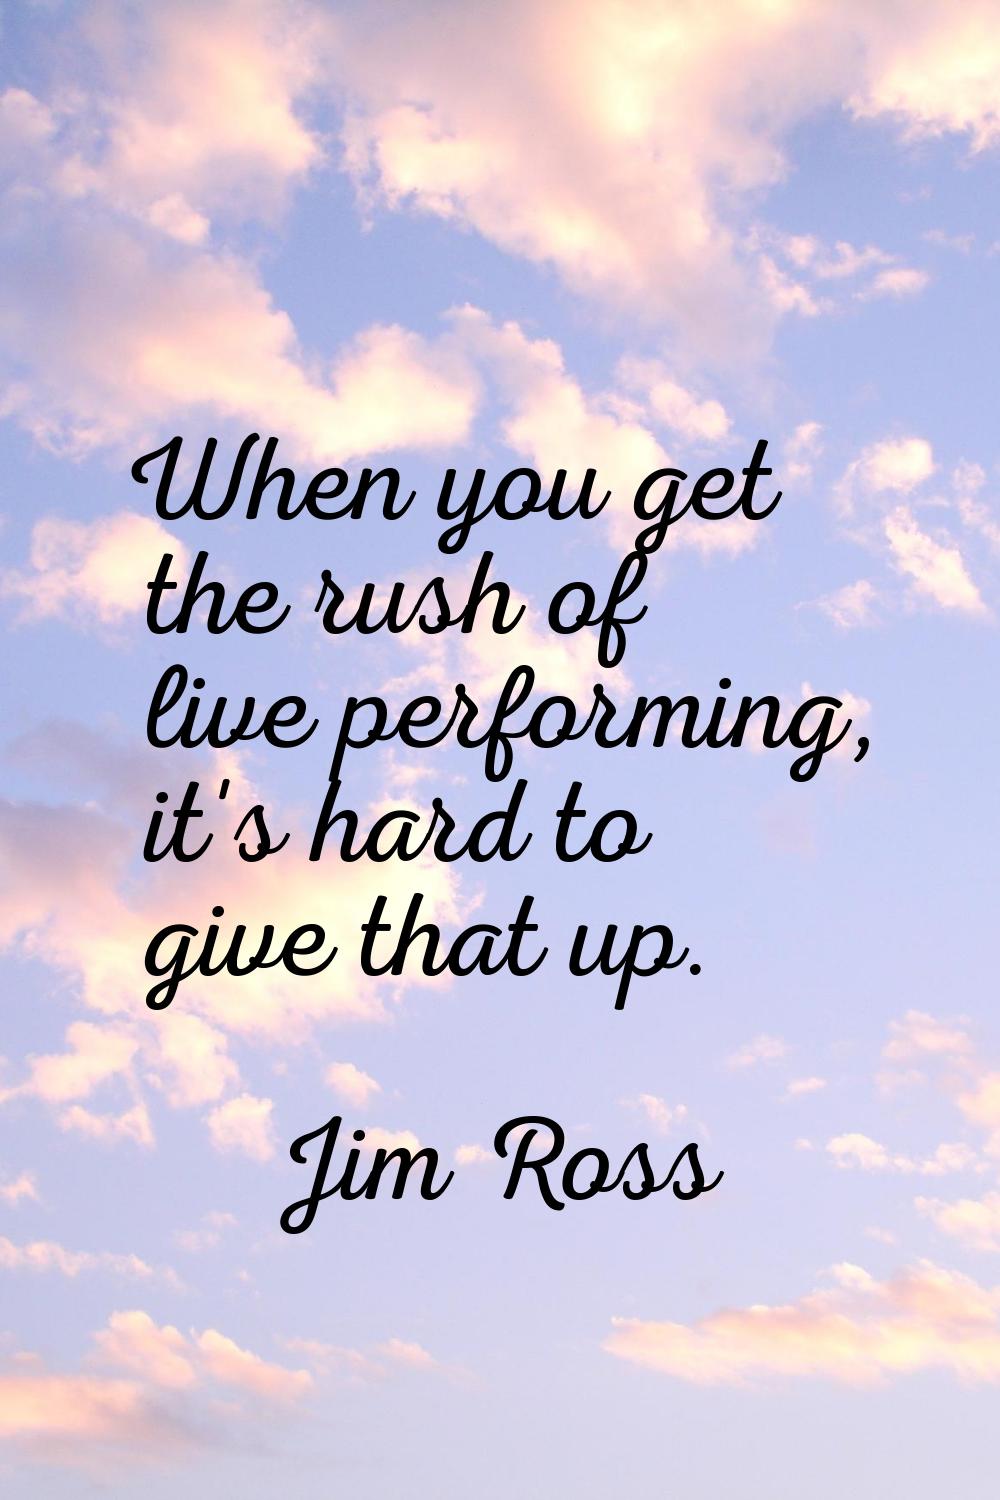 When you get the rush of live performing, it's hard to give that up.